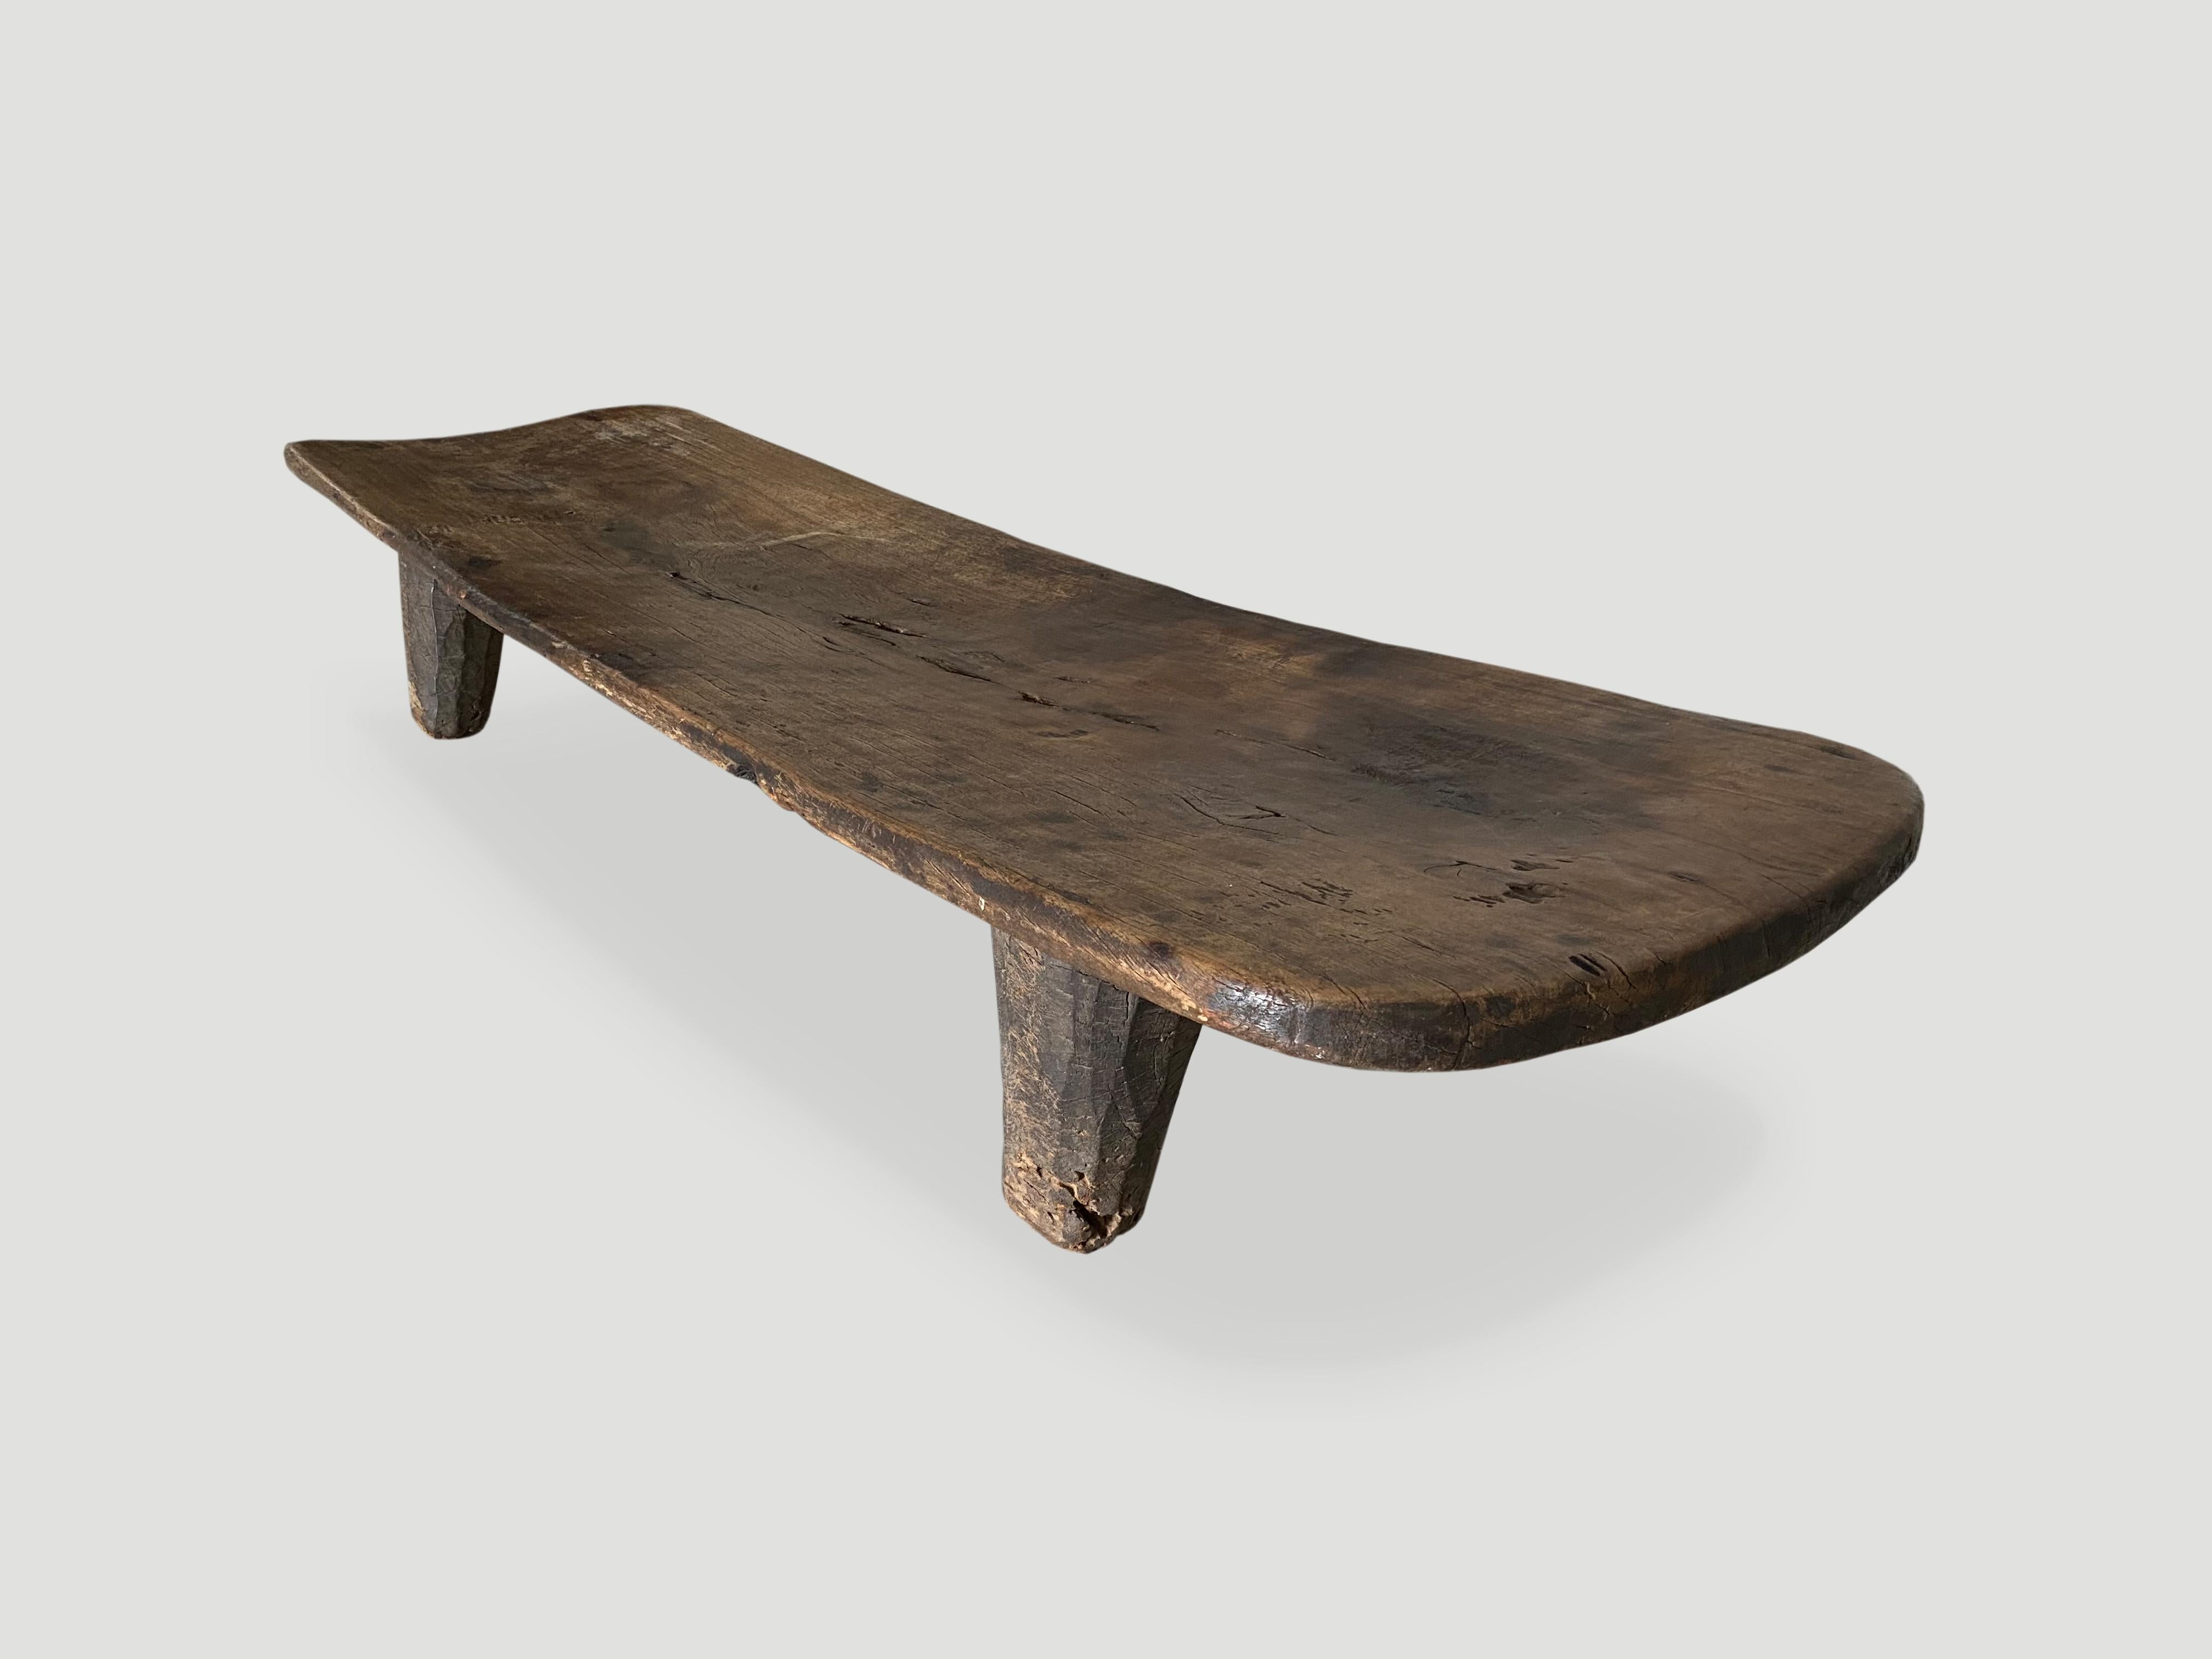 Tribal Andrianna Shamaris Antique African Bench, Coffee Table or Daybed